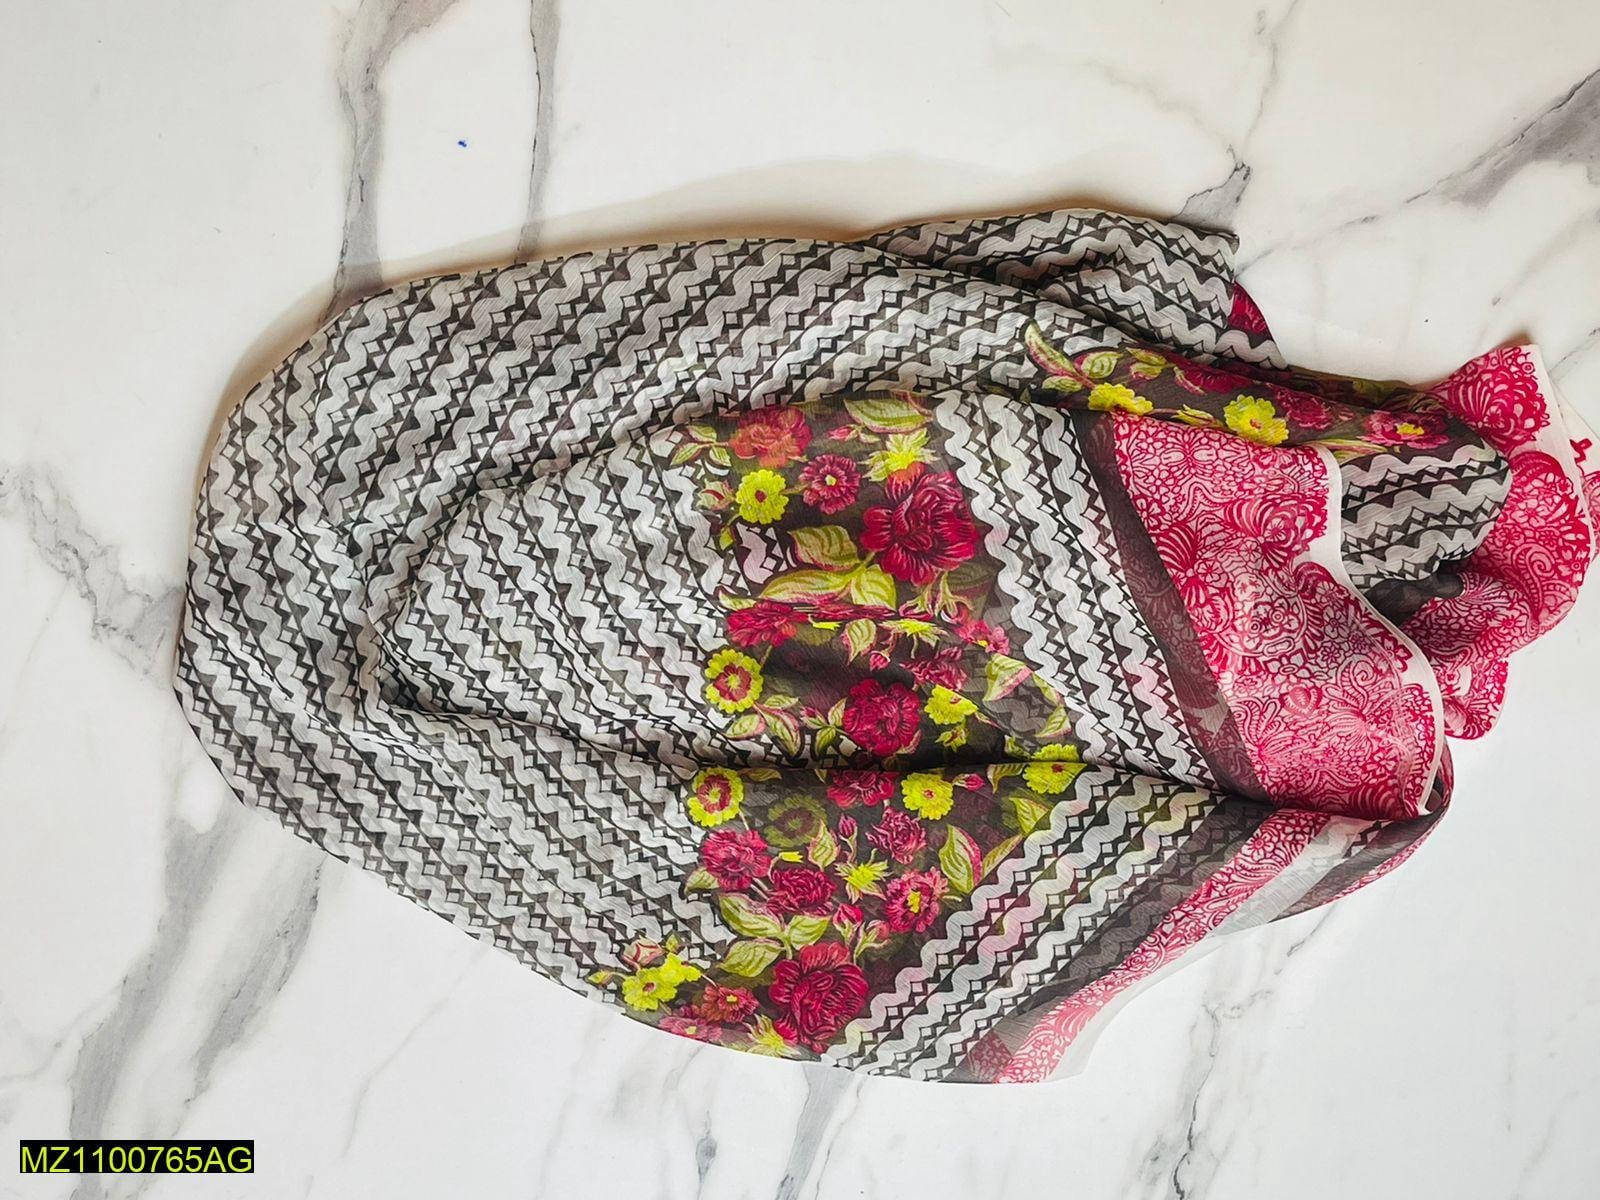 The Wearing Branded Dupatta for Ladies Islamabad - Pakistan 